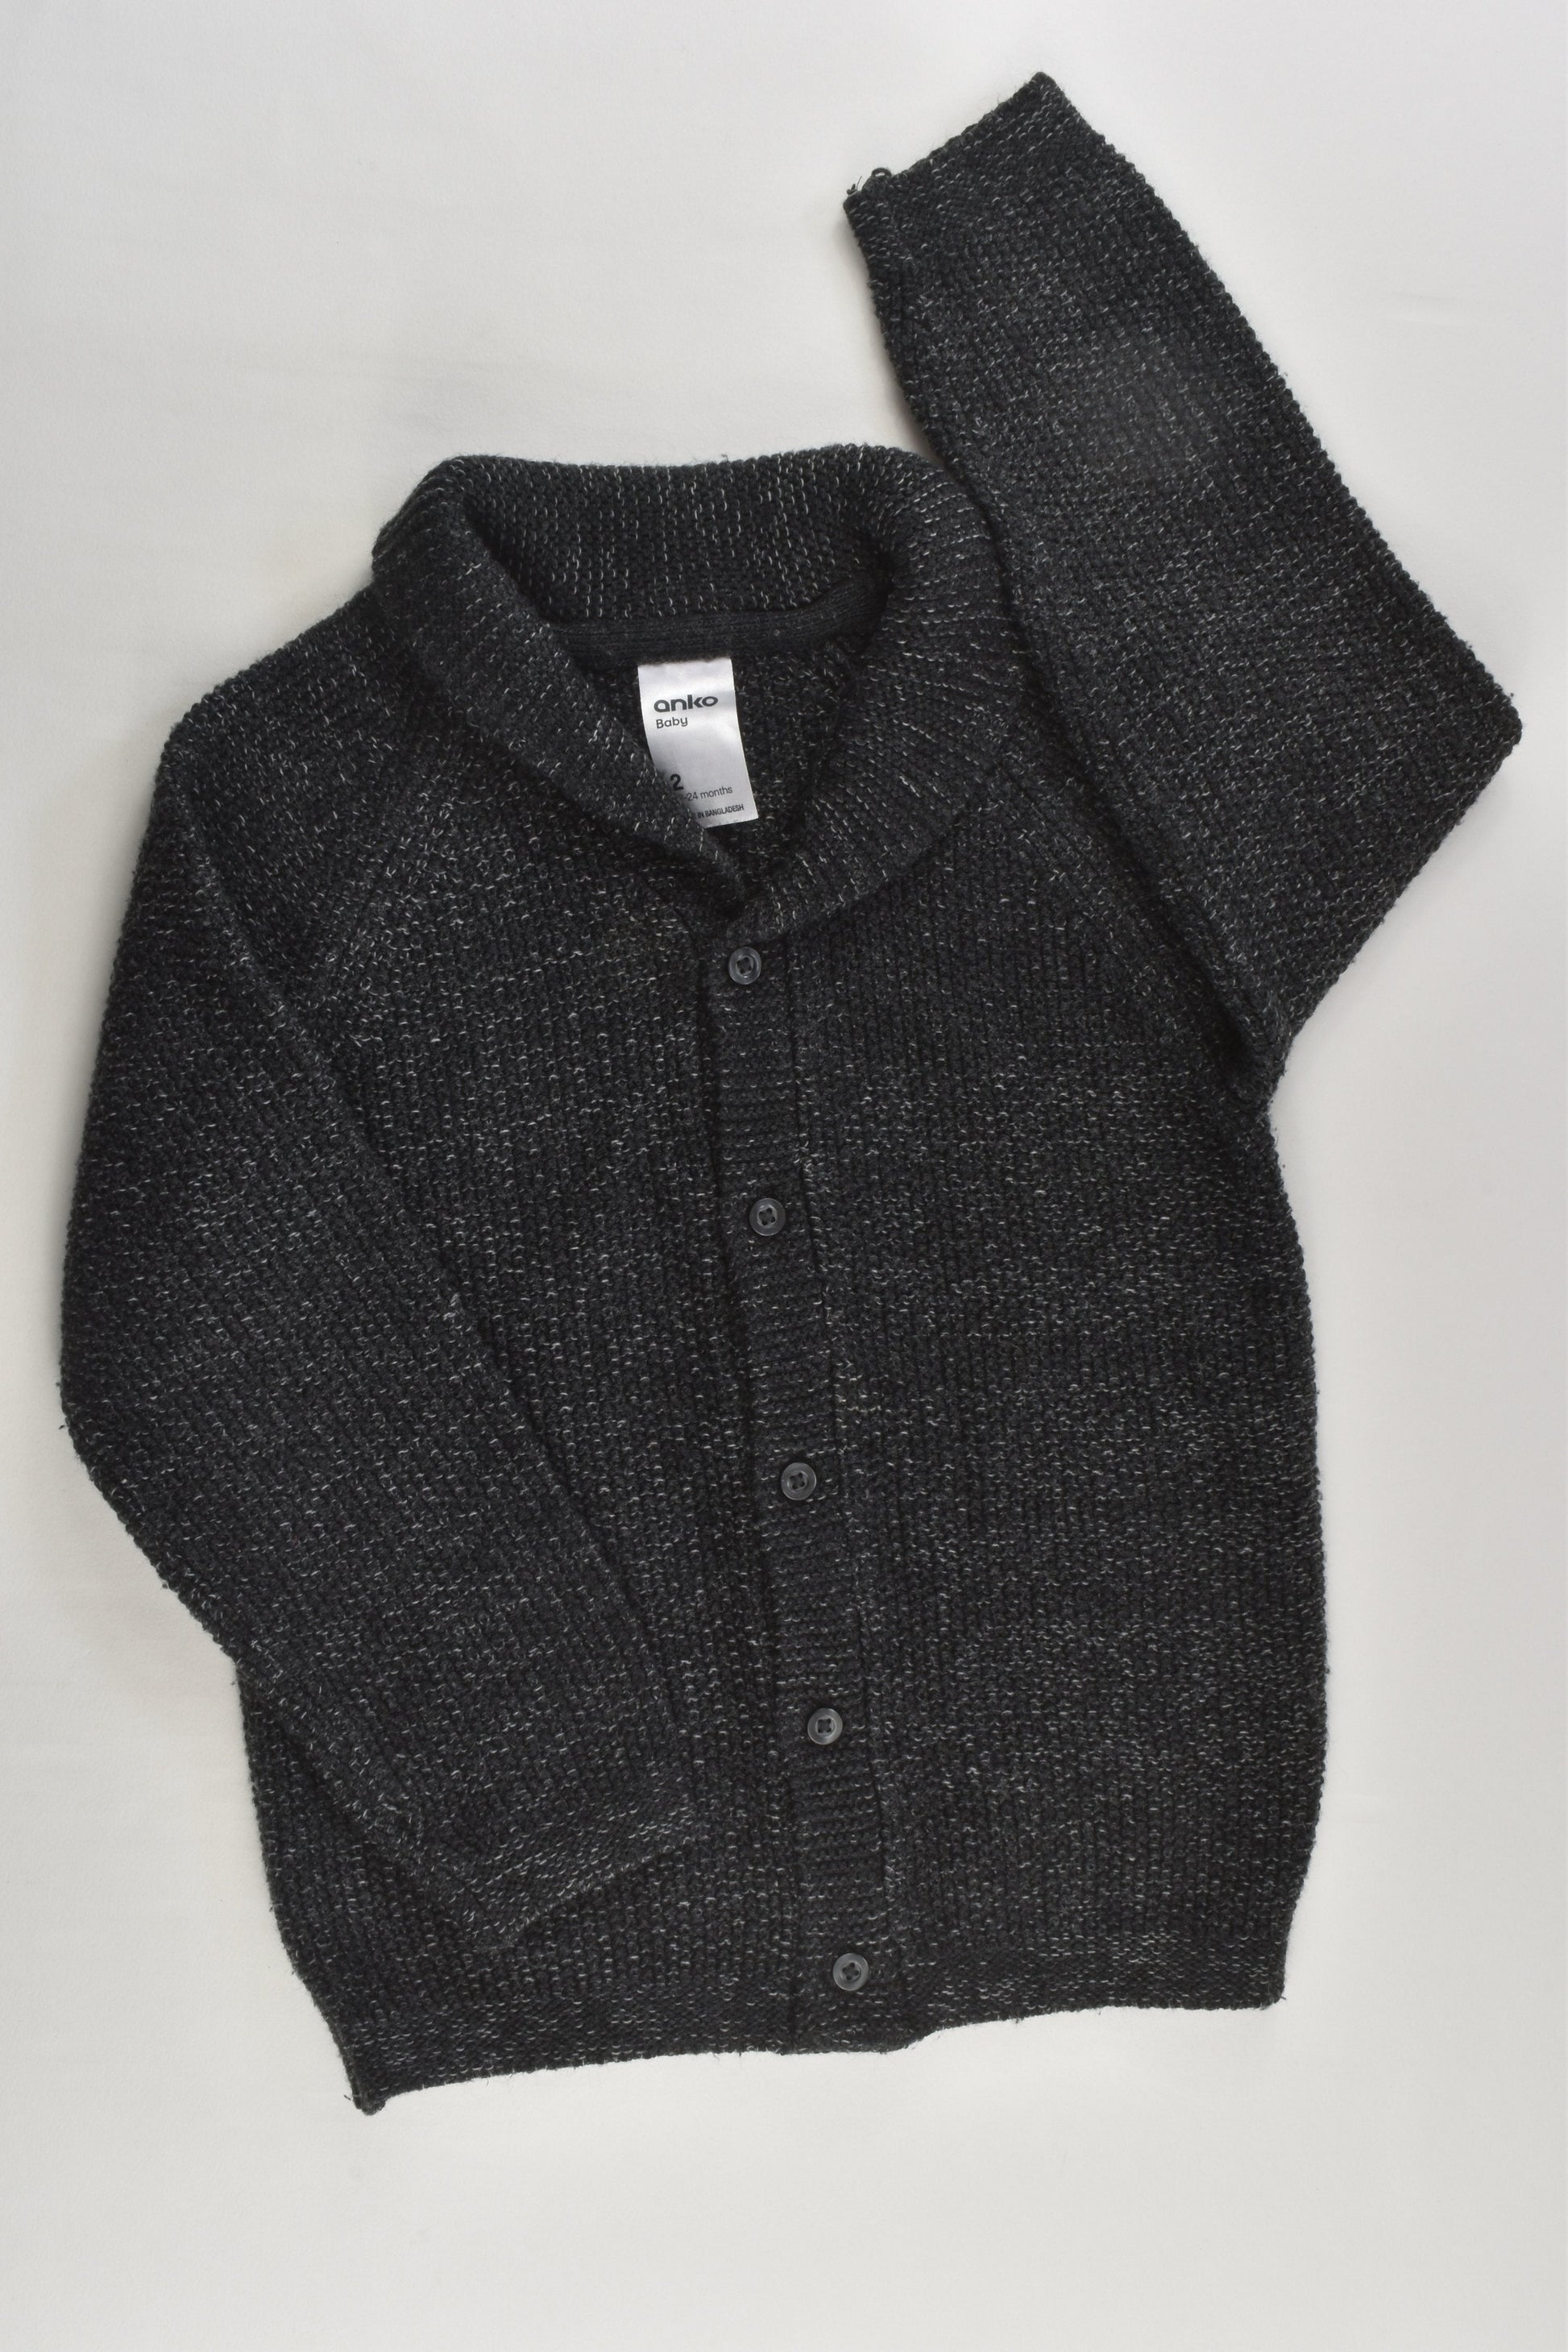 Anko Size 2 Knitted Cardigan